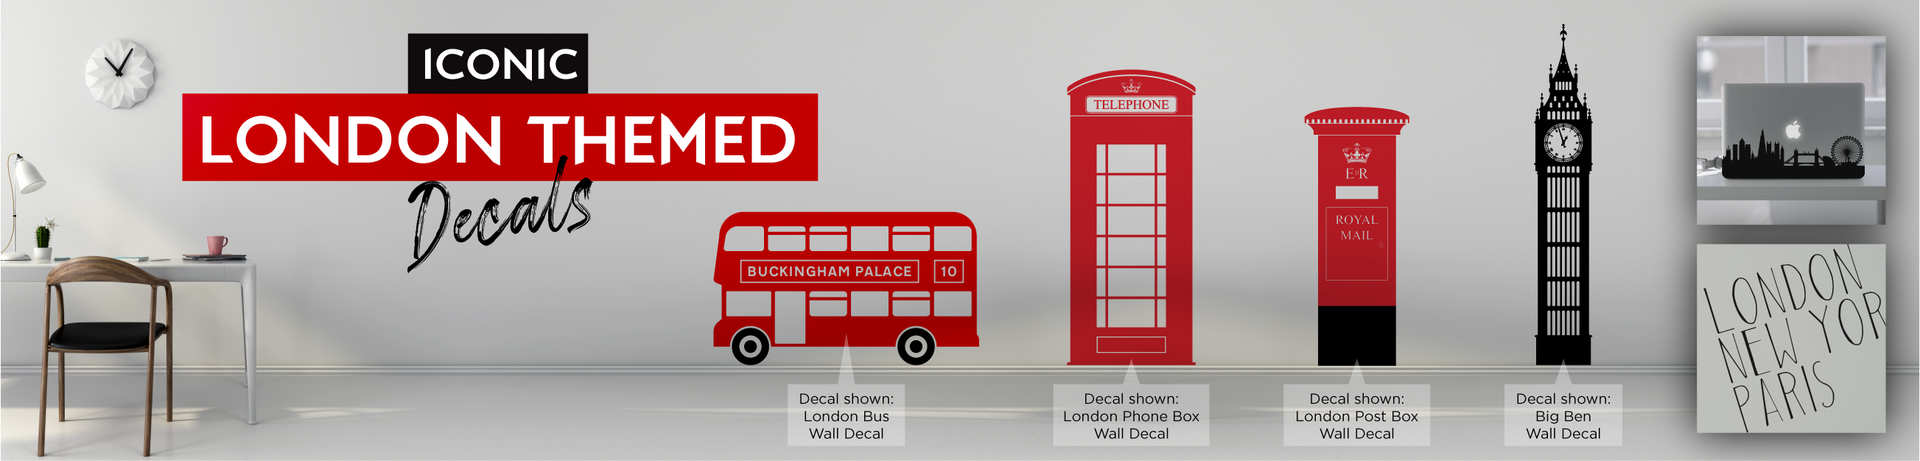 London themed decals on a pale grey wall